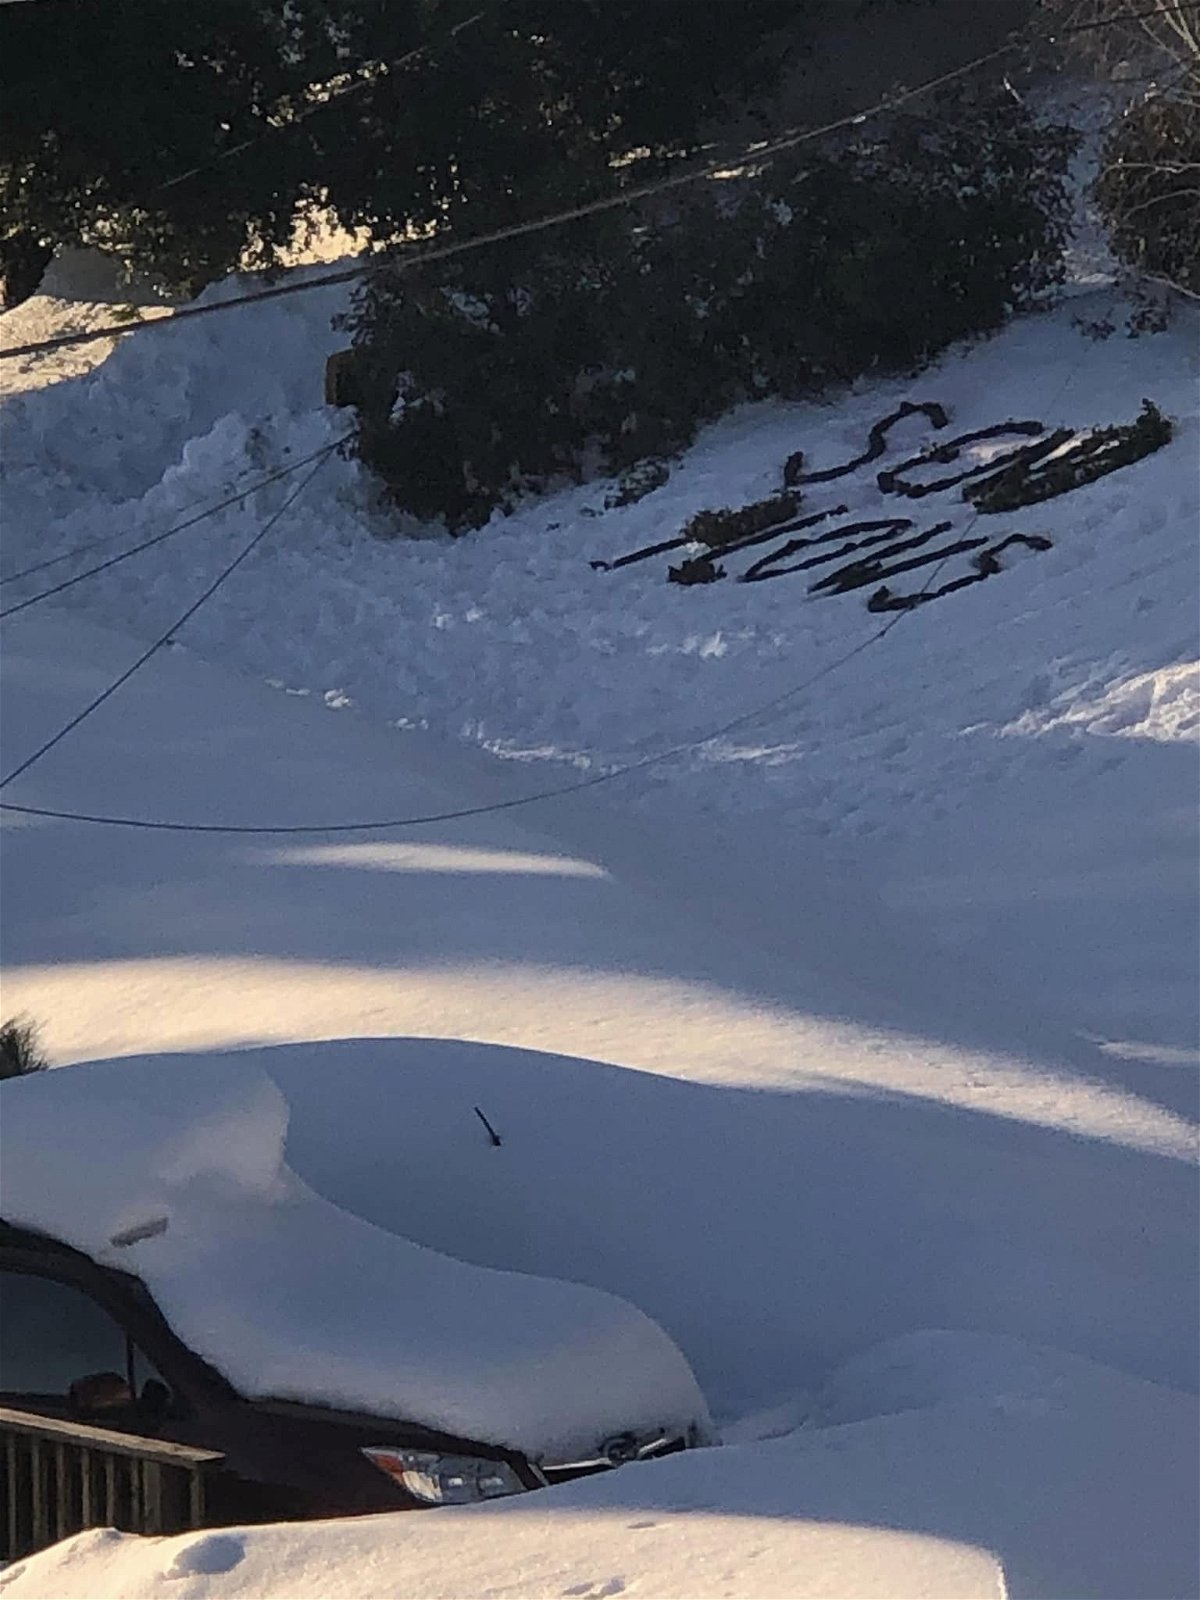 <i>Krissy Marcum</i><br/>Krissy Marcum shared video with CNN that shows “SEND PLOWS” written out in black trash bags on top of a shady patch of snow as helicopters circle the area above.